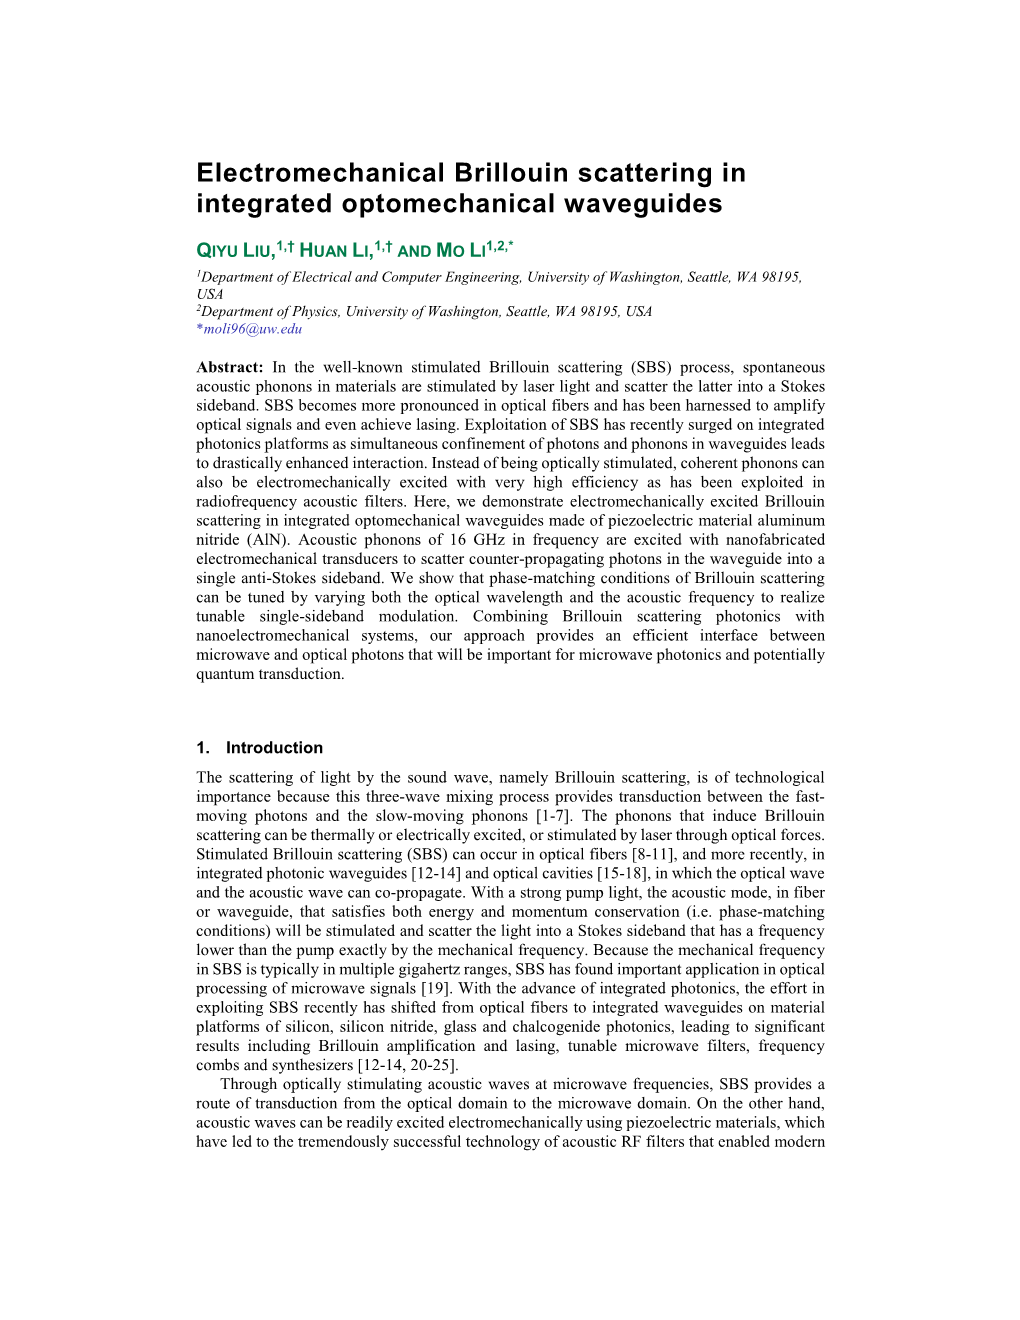 Electromechanical Brillouin Scattering in Integrated Optomechanical Waveguides